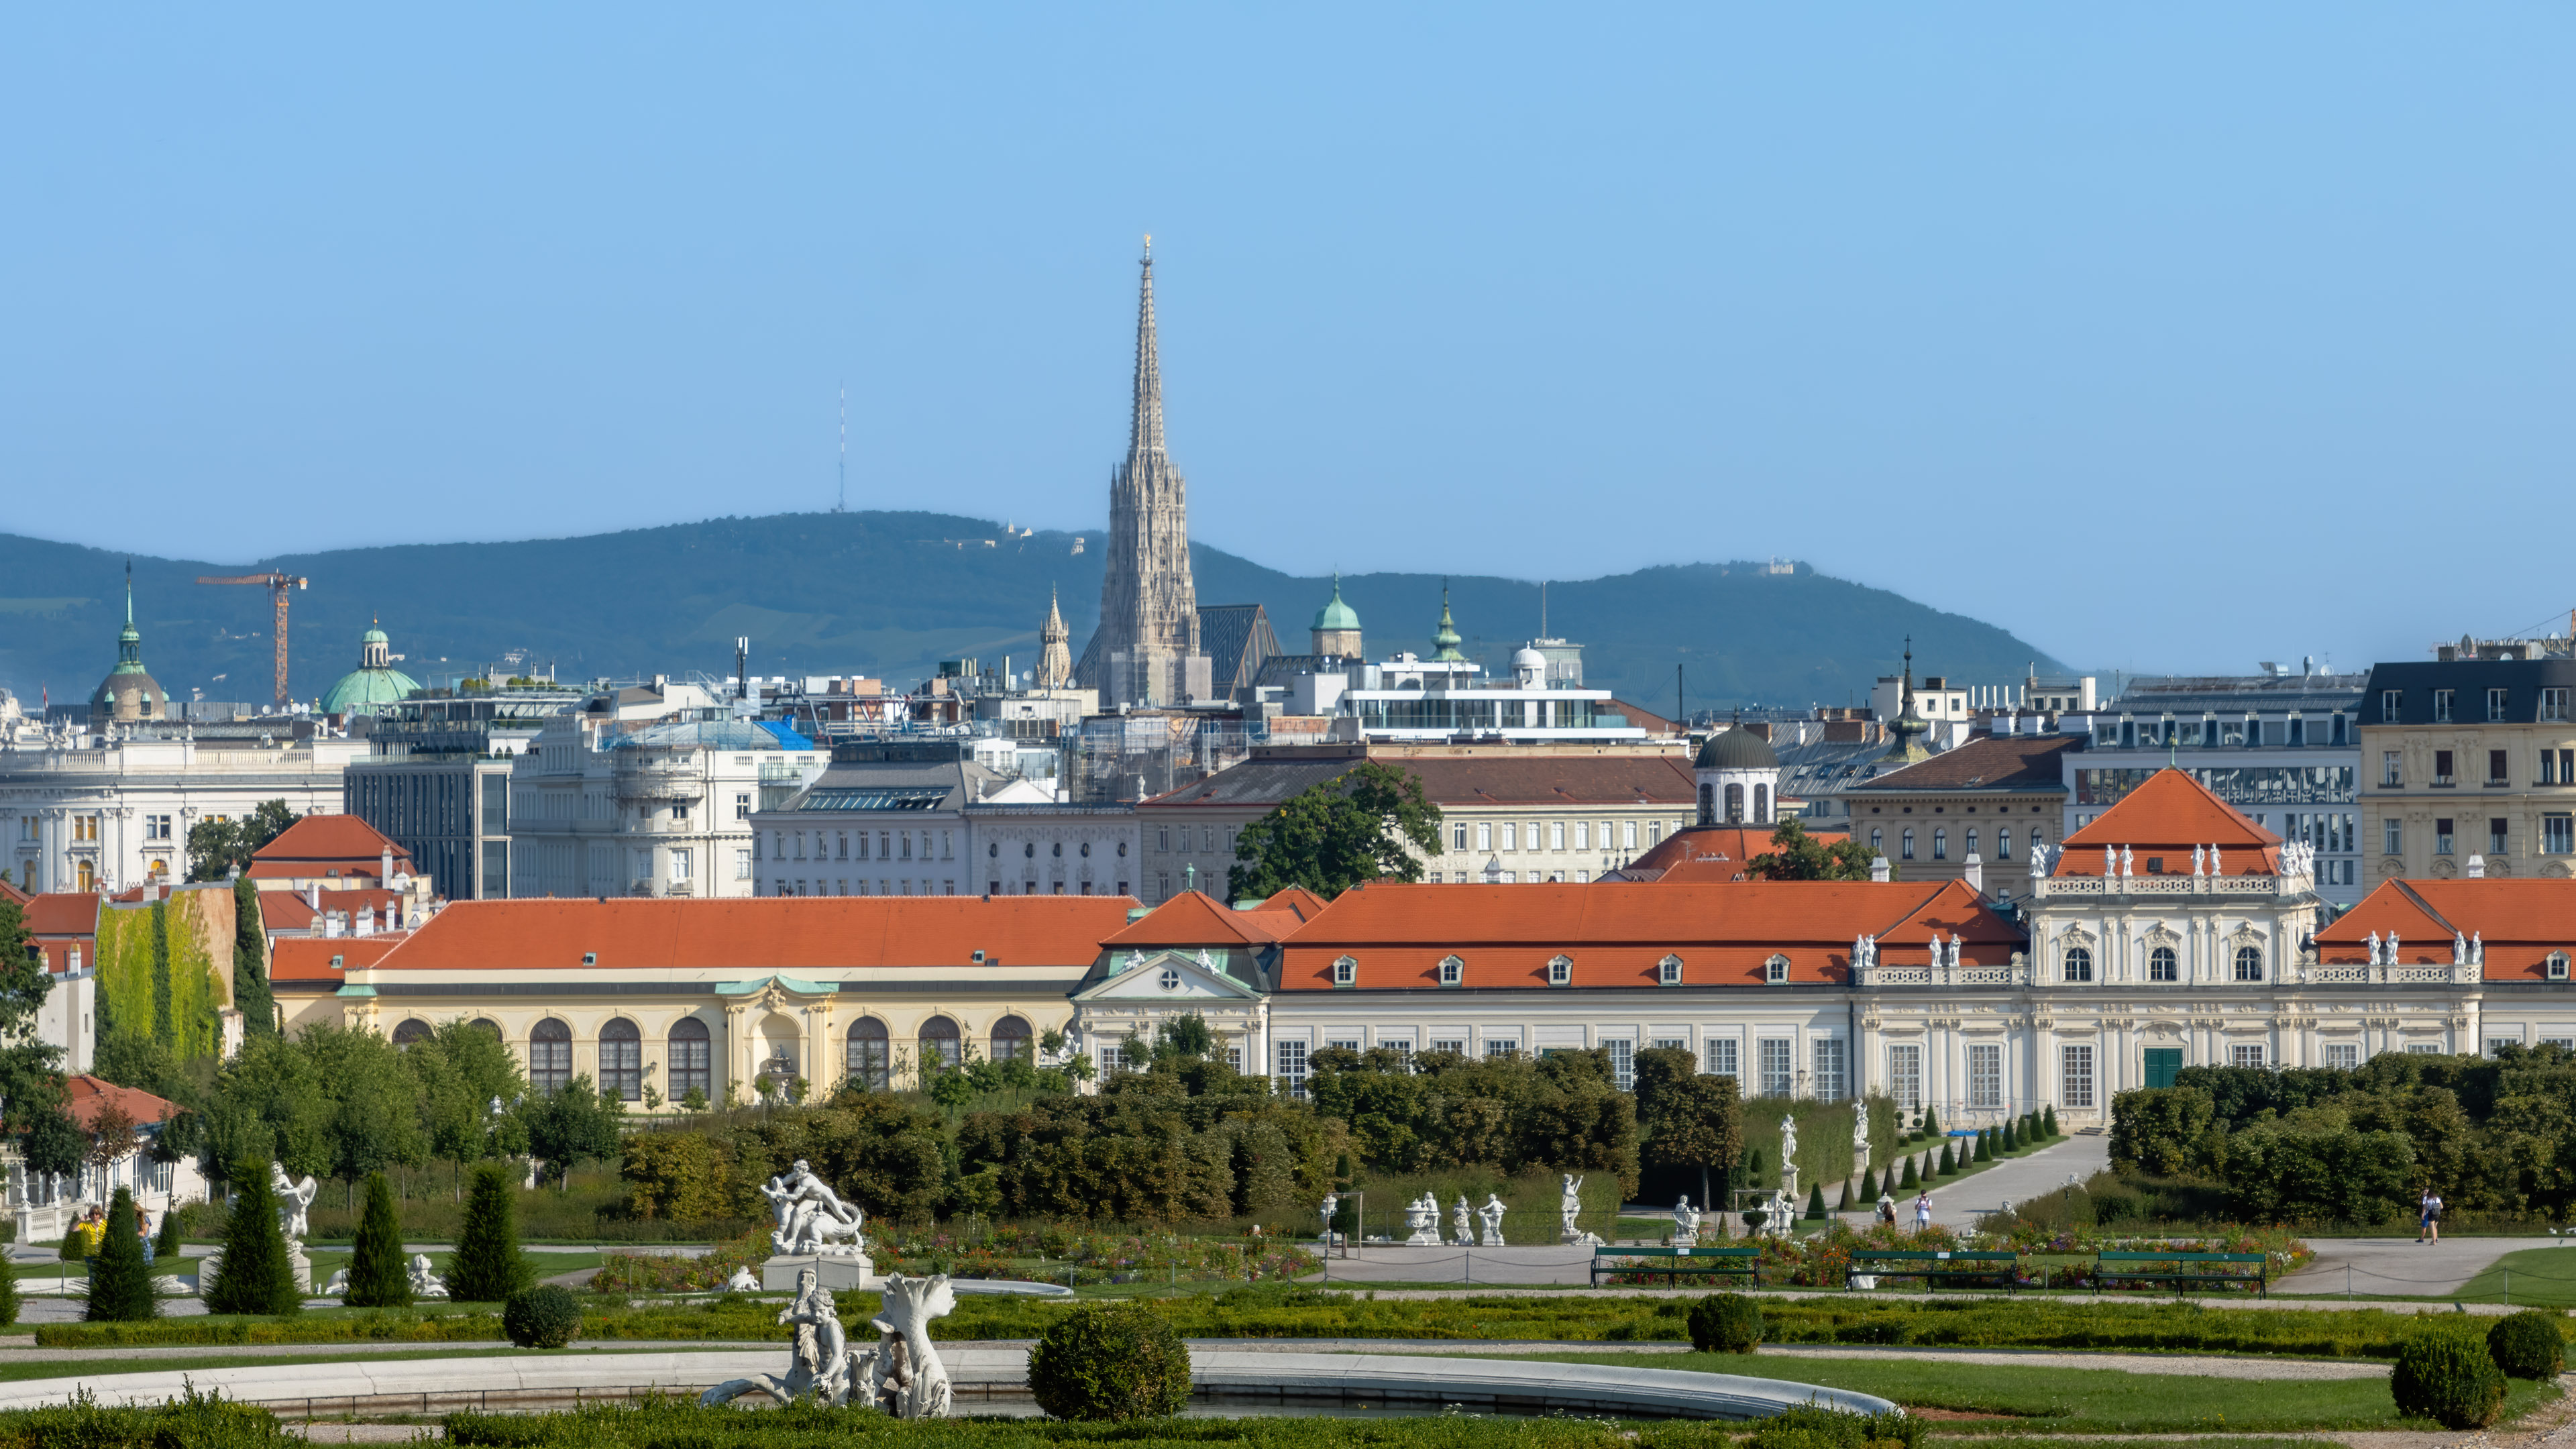 Get this stunning Vienna cityscape wallpaper for your desktop or mobile device